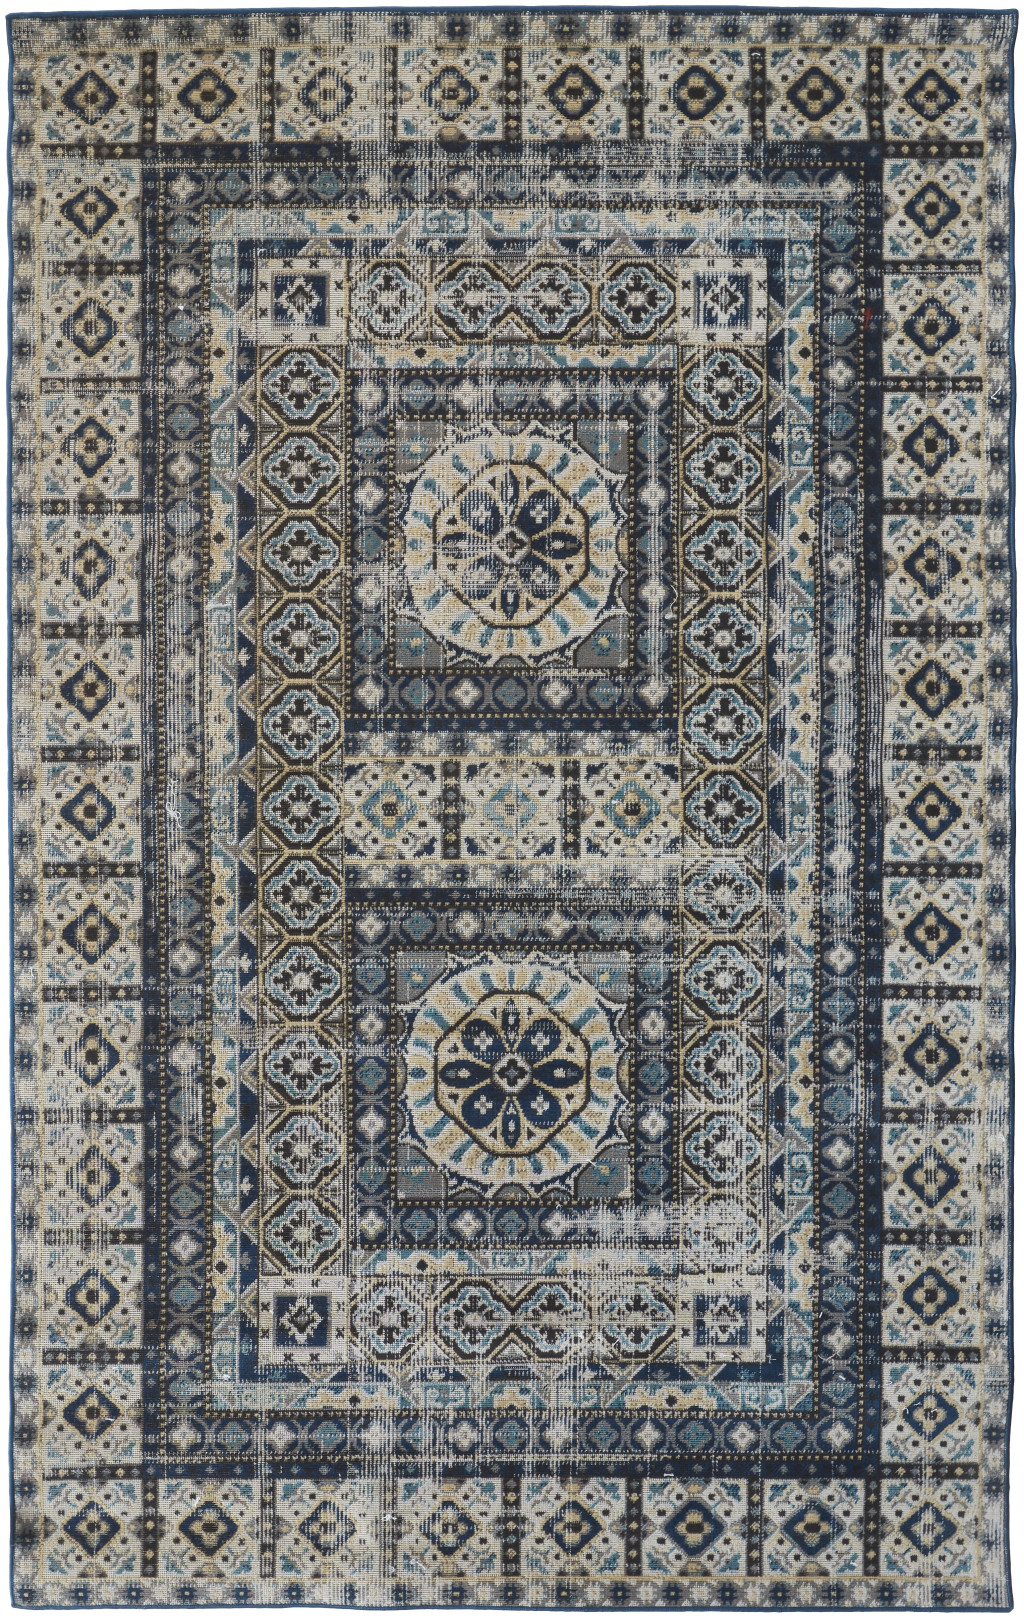 5' X 8' Ivory Tan And Blue Abstract Power Loom Distressed Stain Resistant Area Rug-514626-1